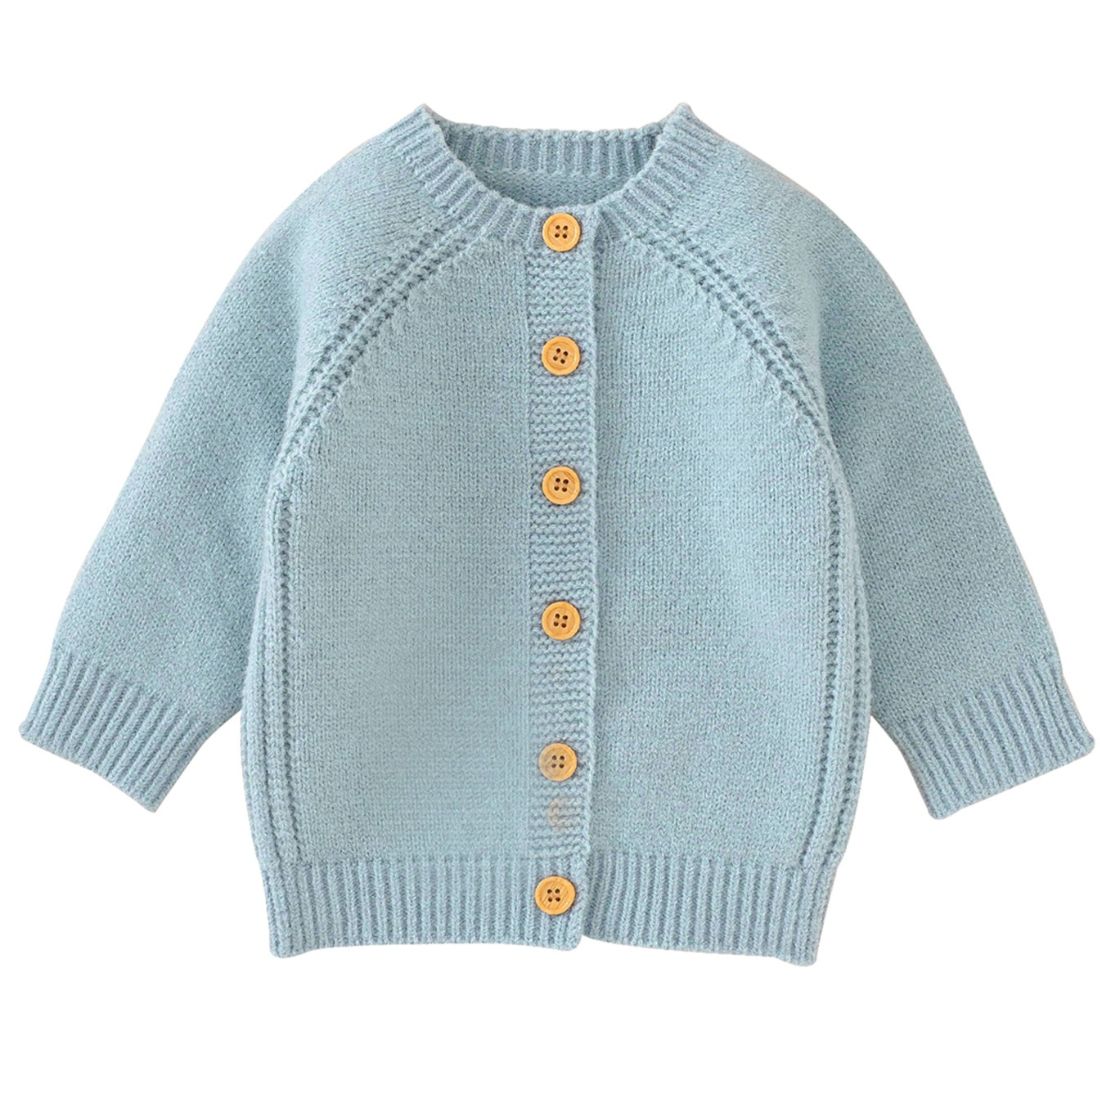 One Line Knit Baby Cardigan - My Trendy Youngsters | Buy on-trend and stylish Baby and Toddler Winter Threads @ My Trendy Youngsters - Dress your little one in Style @ My Trendy Youngsters 